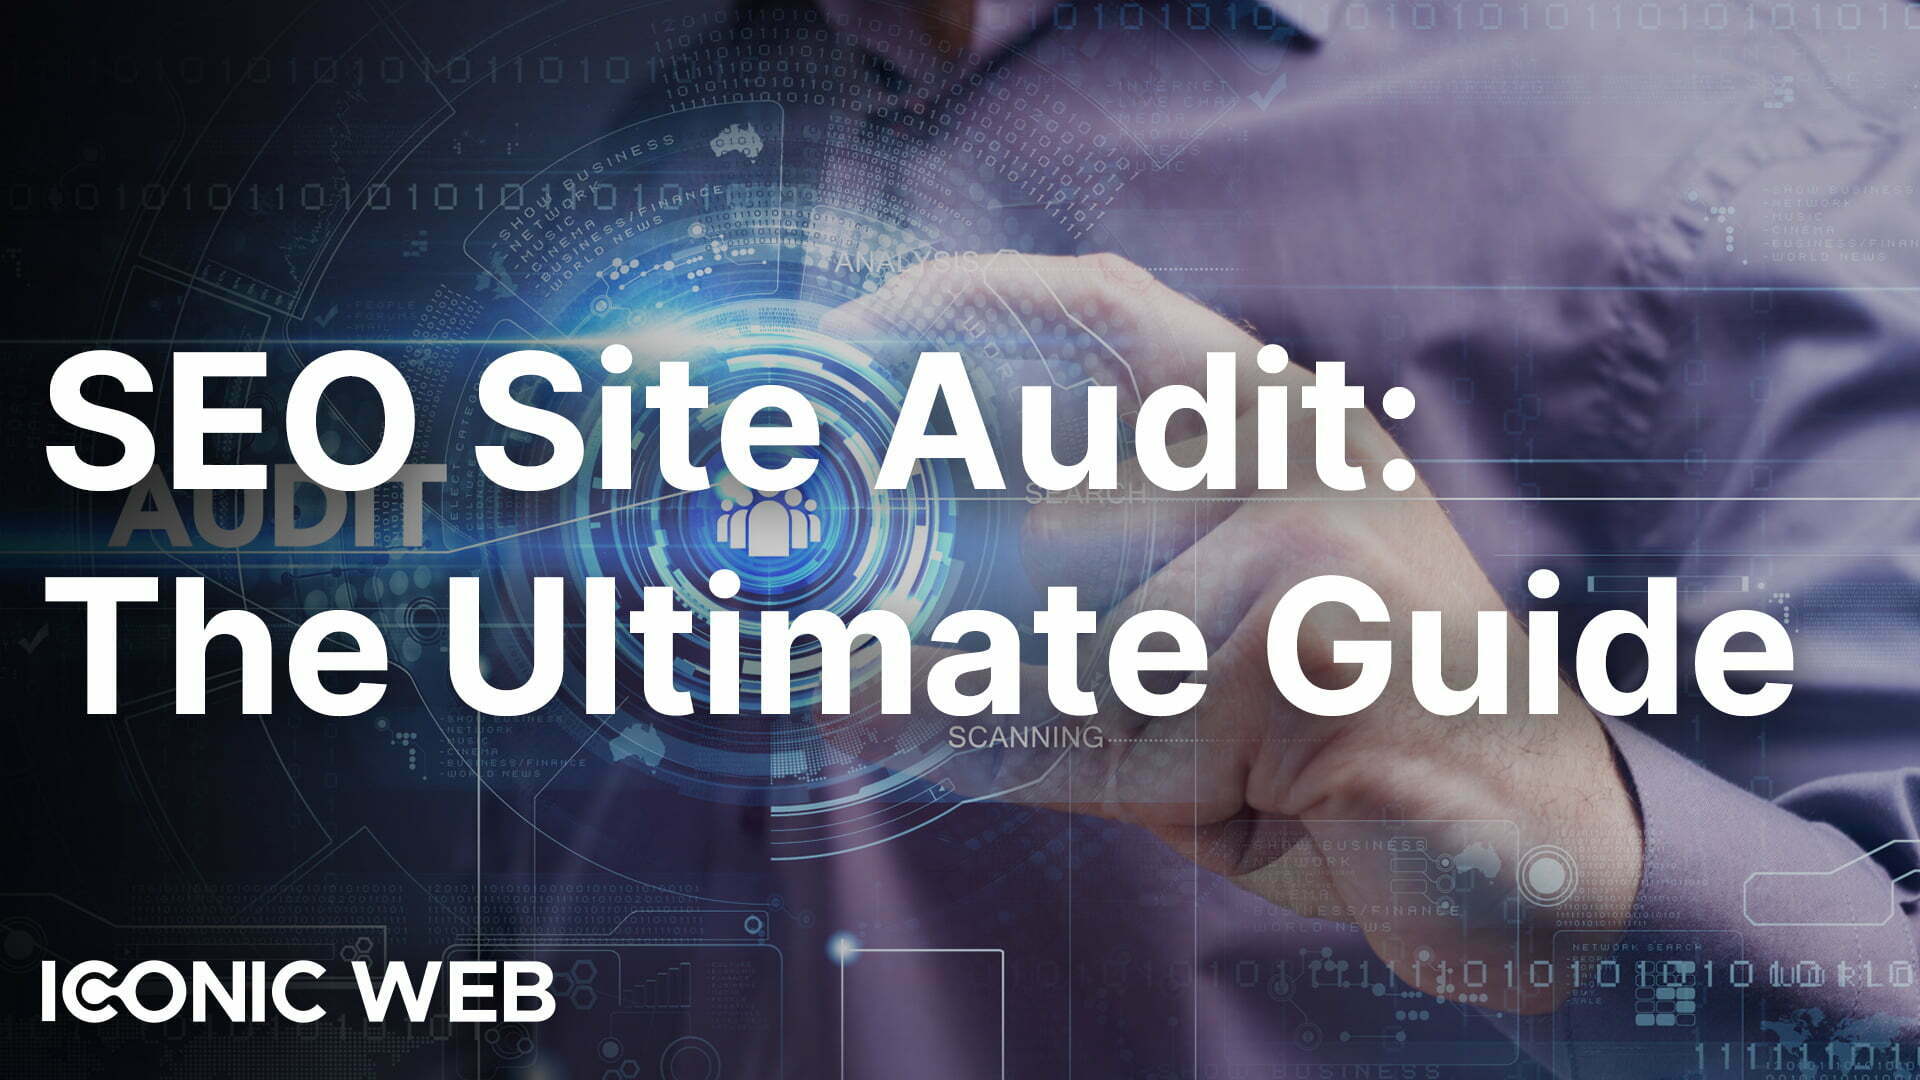 SEO Site Audit: The Ultimate Guide